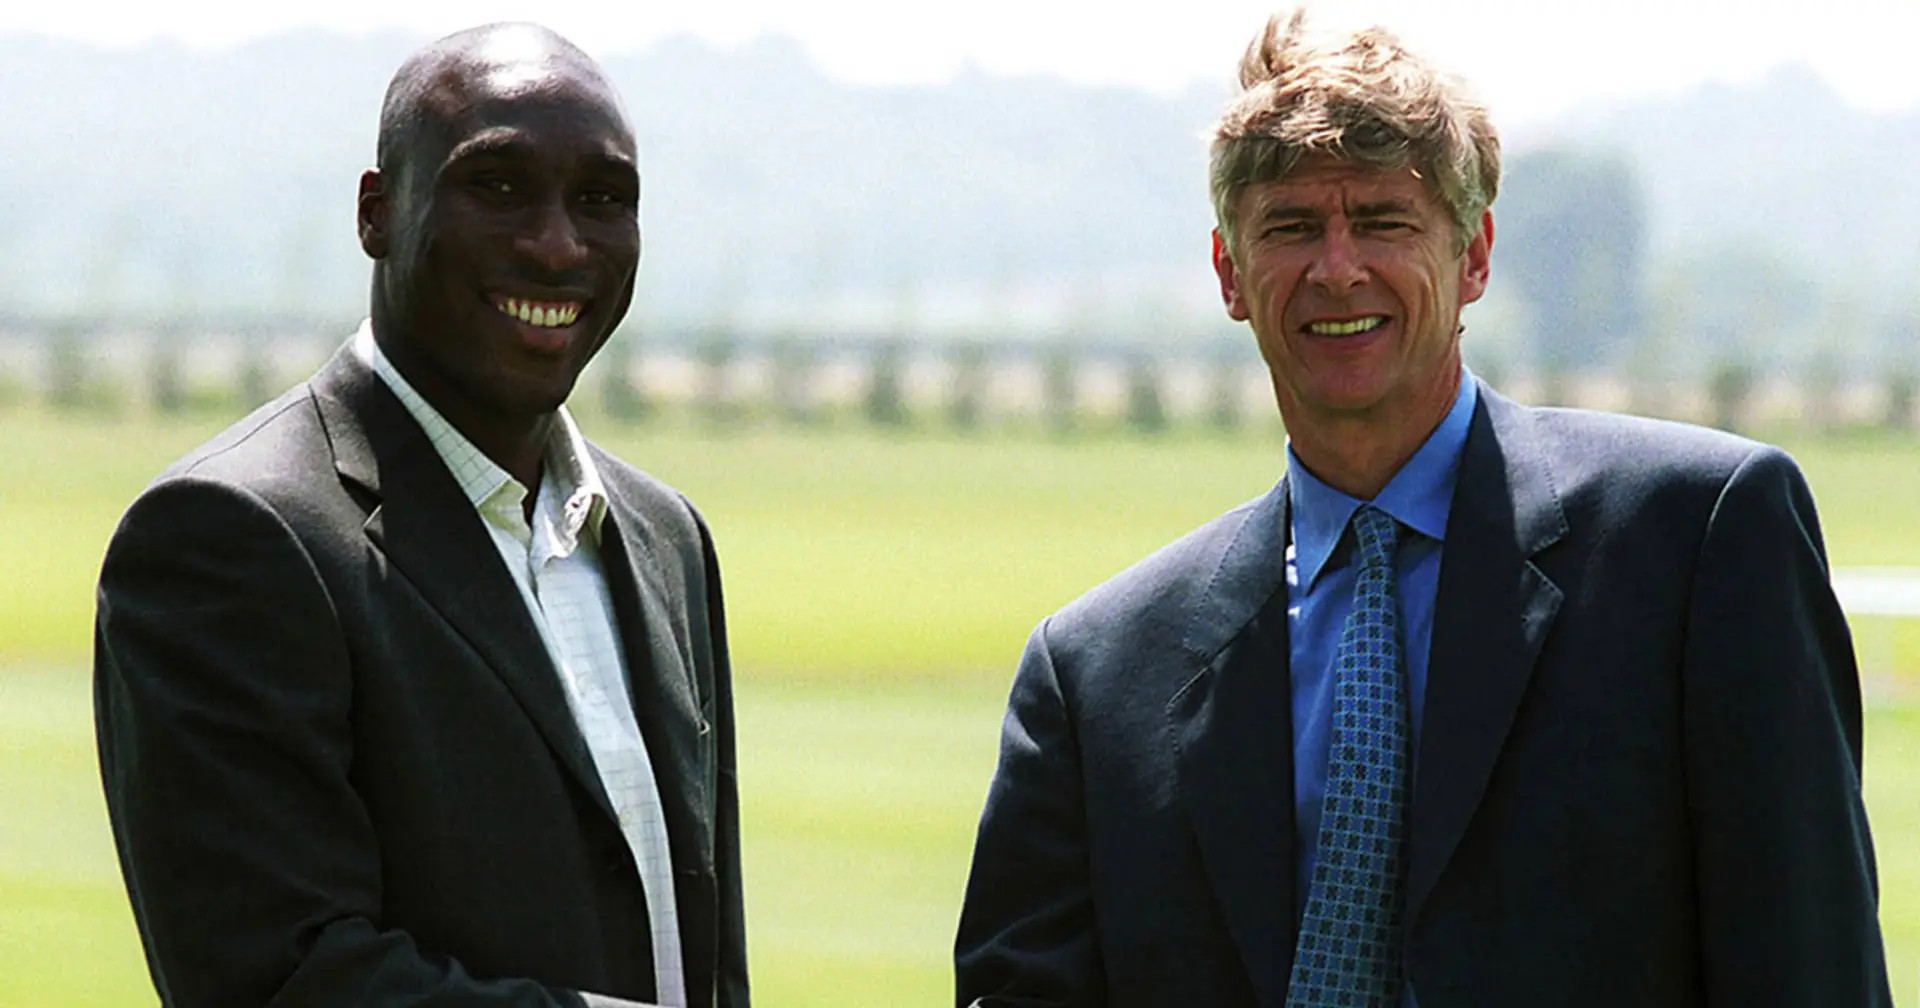 Sol Campbell joined Arsenal on this day in 2001! What's your favourite thing about him?